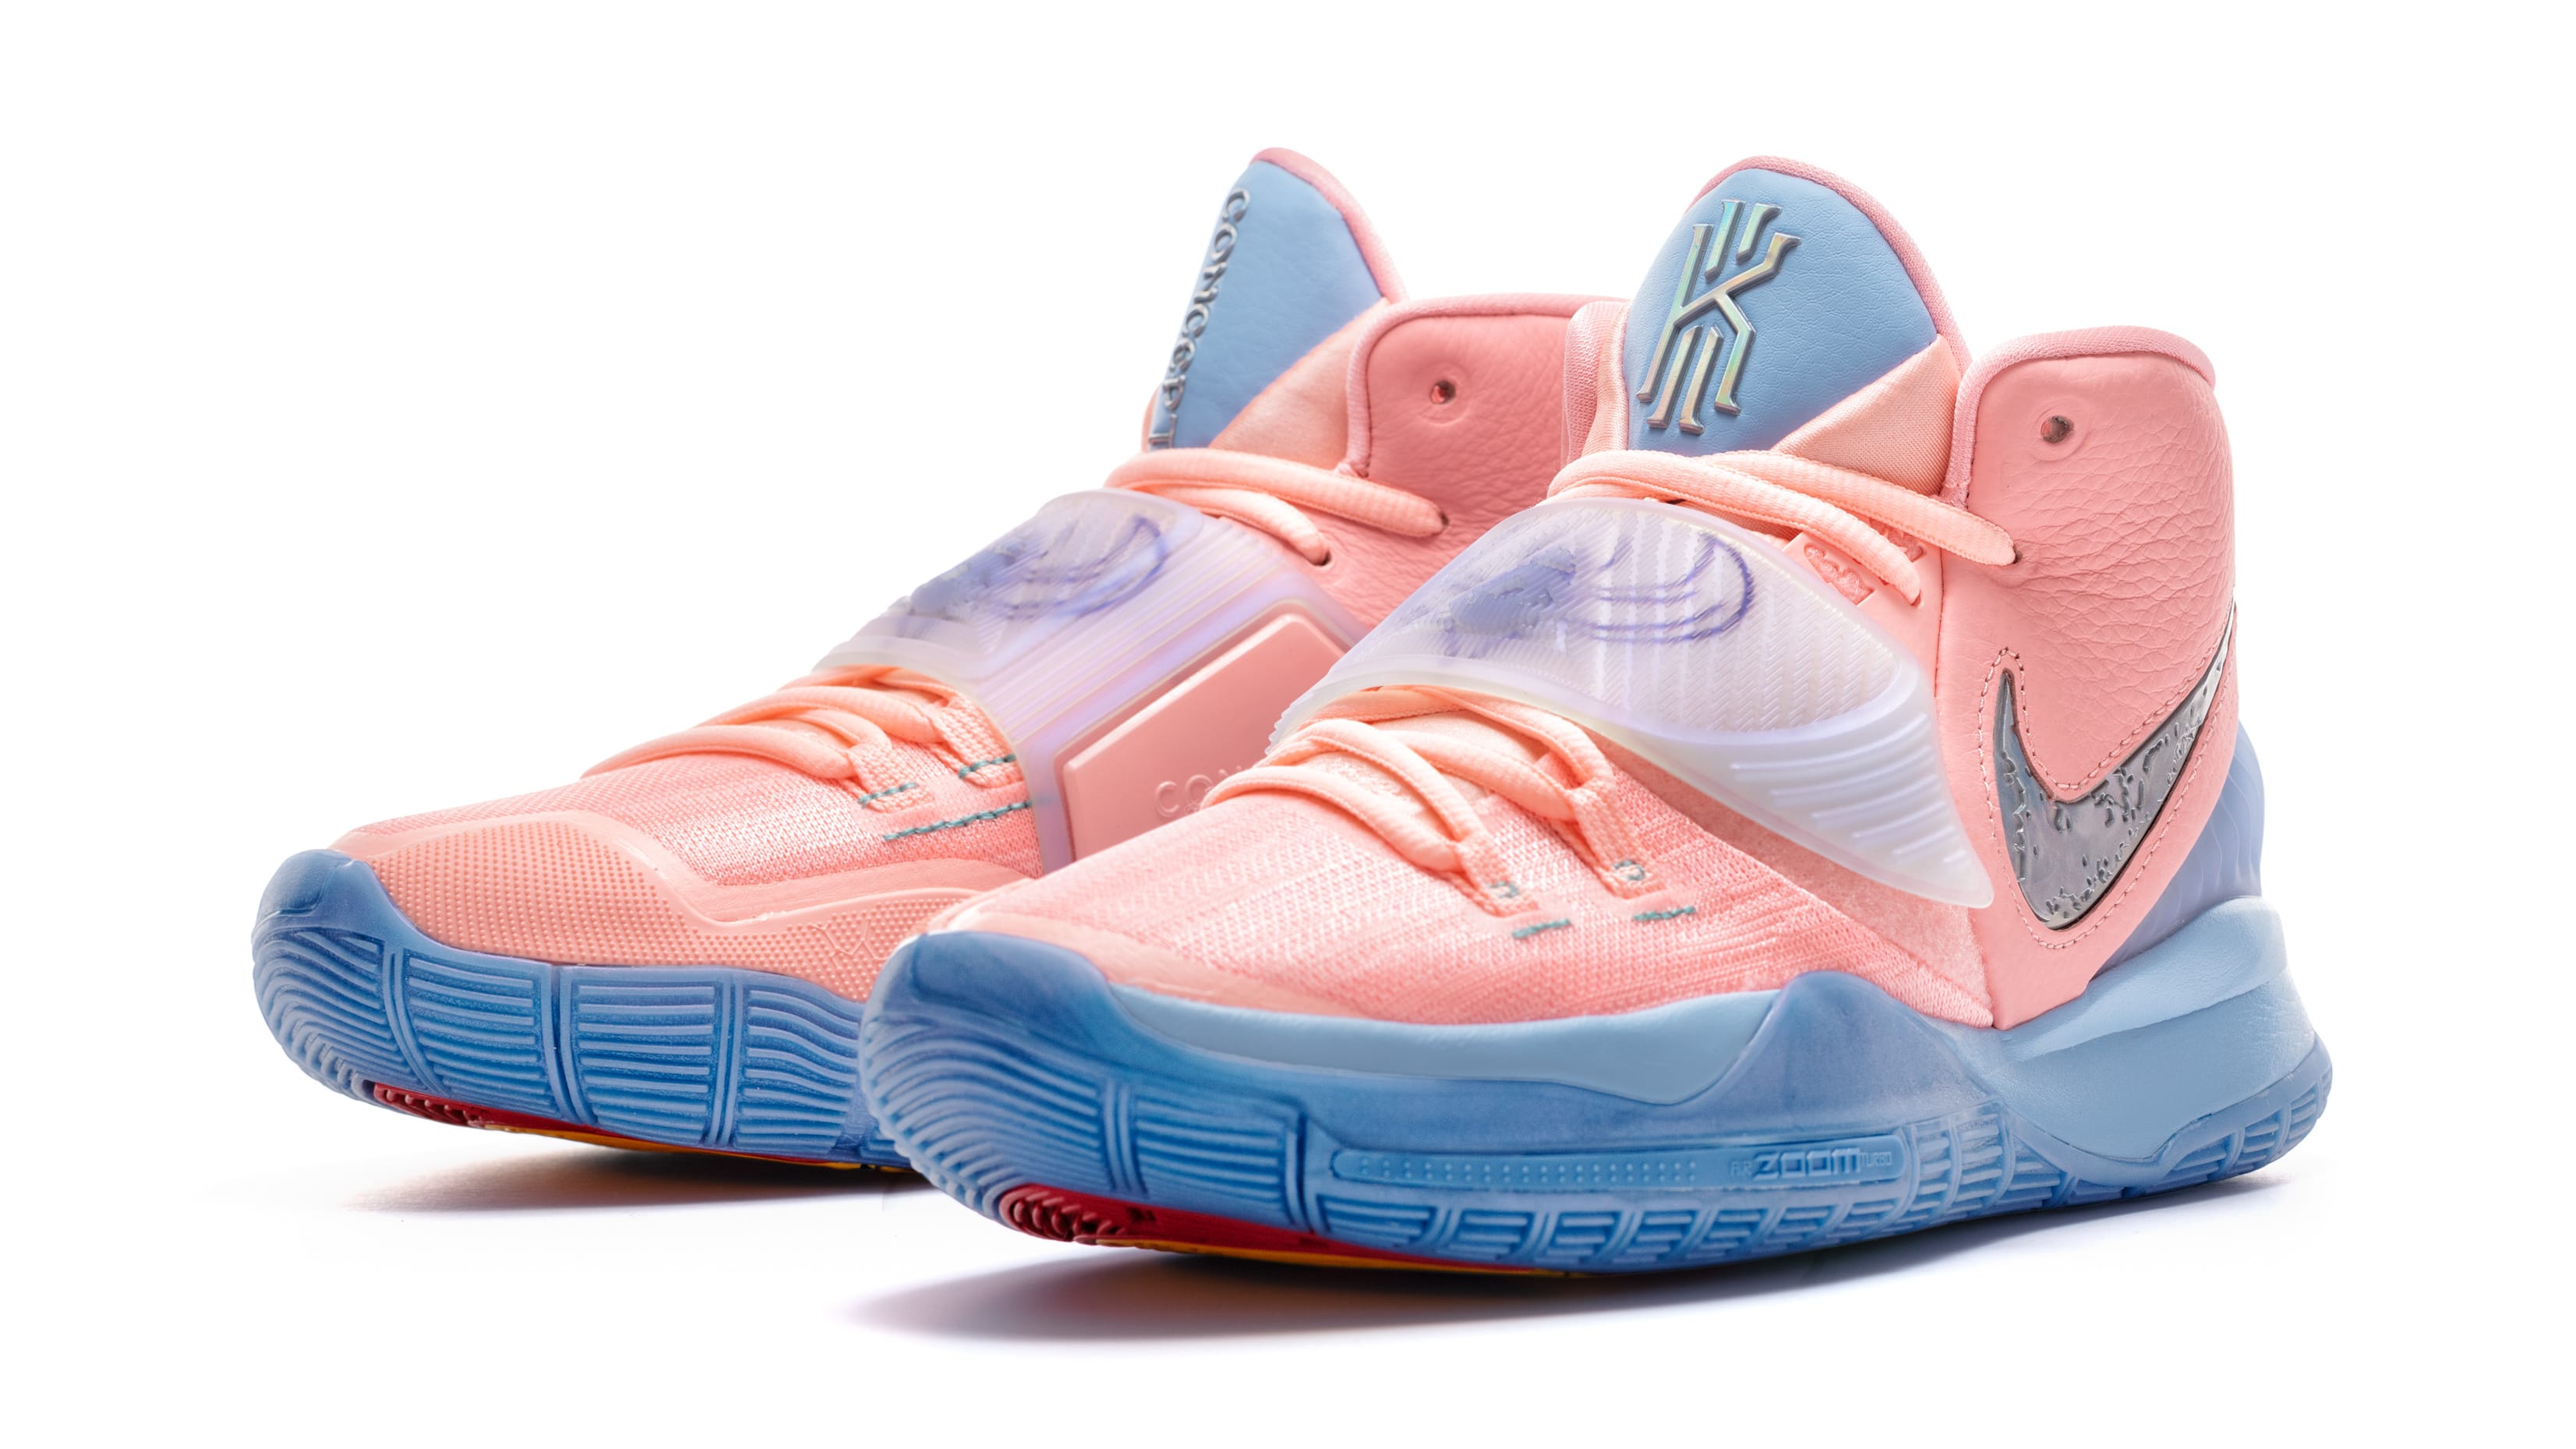 kyrie irving pink shoes